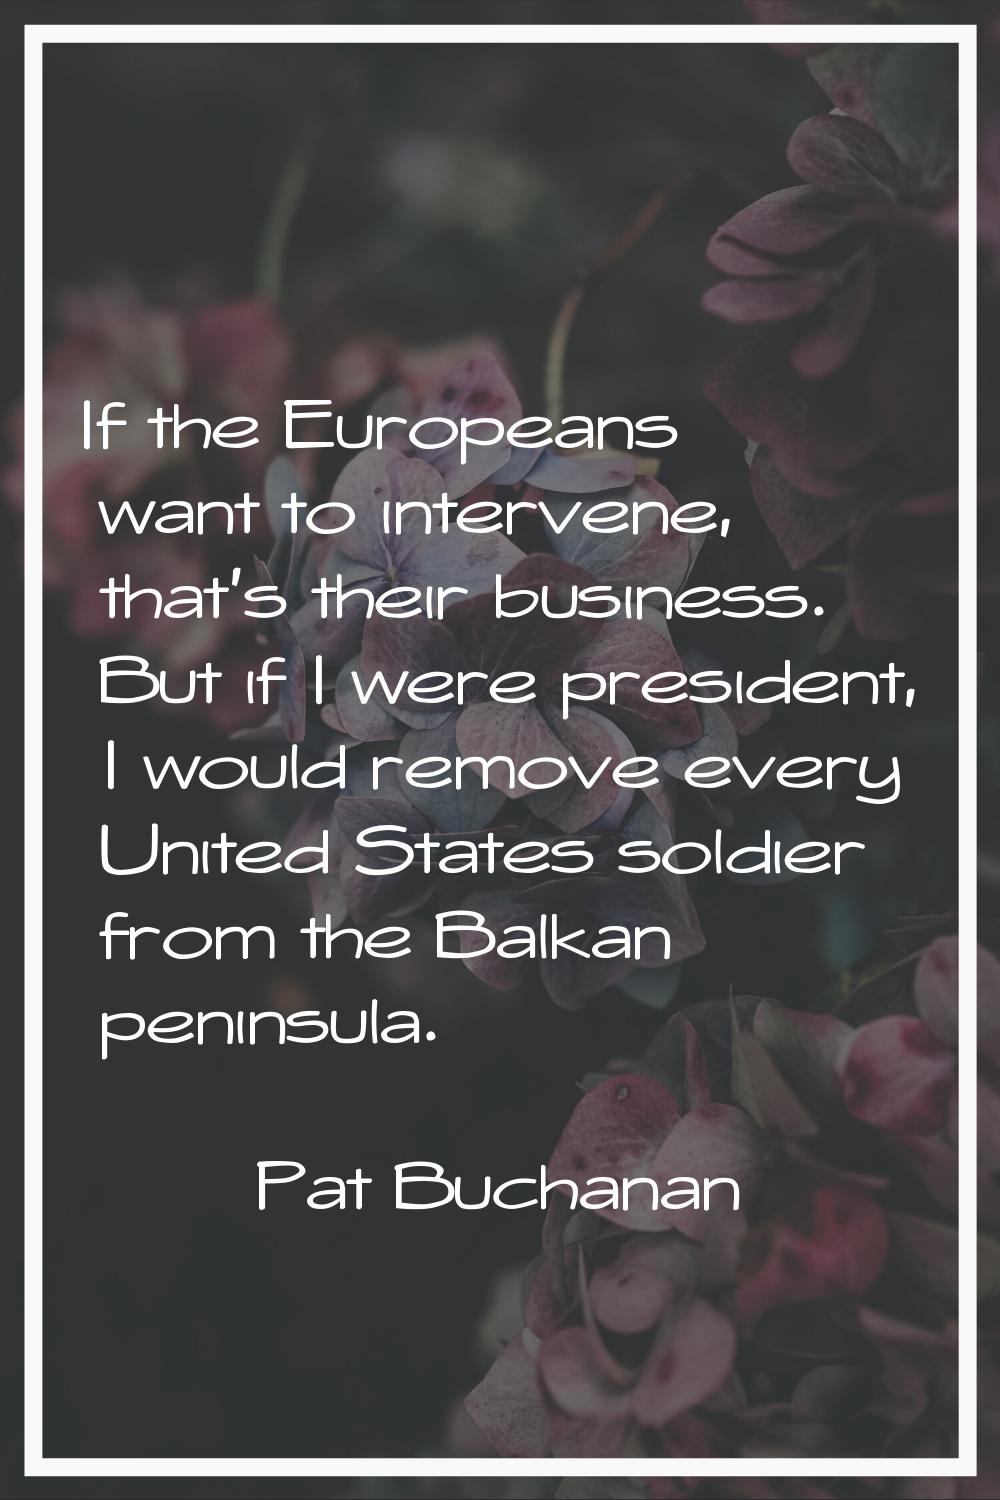 If the Europeans want to intervene, that's their business. But if I were president, I would remove 